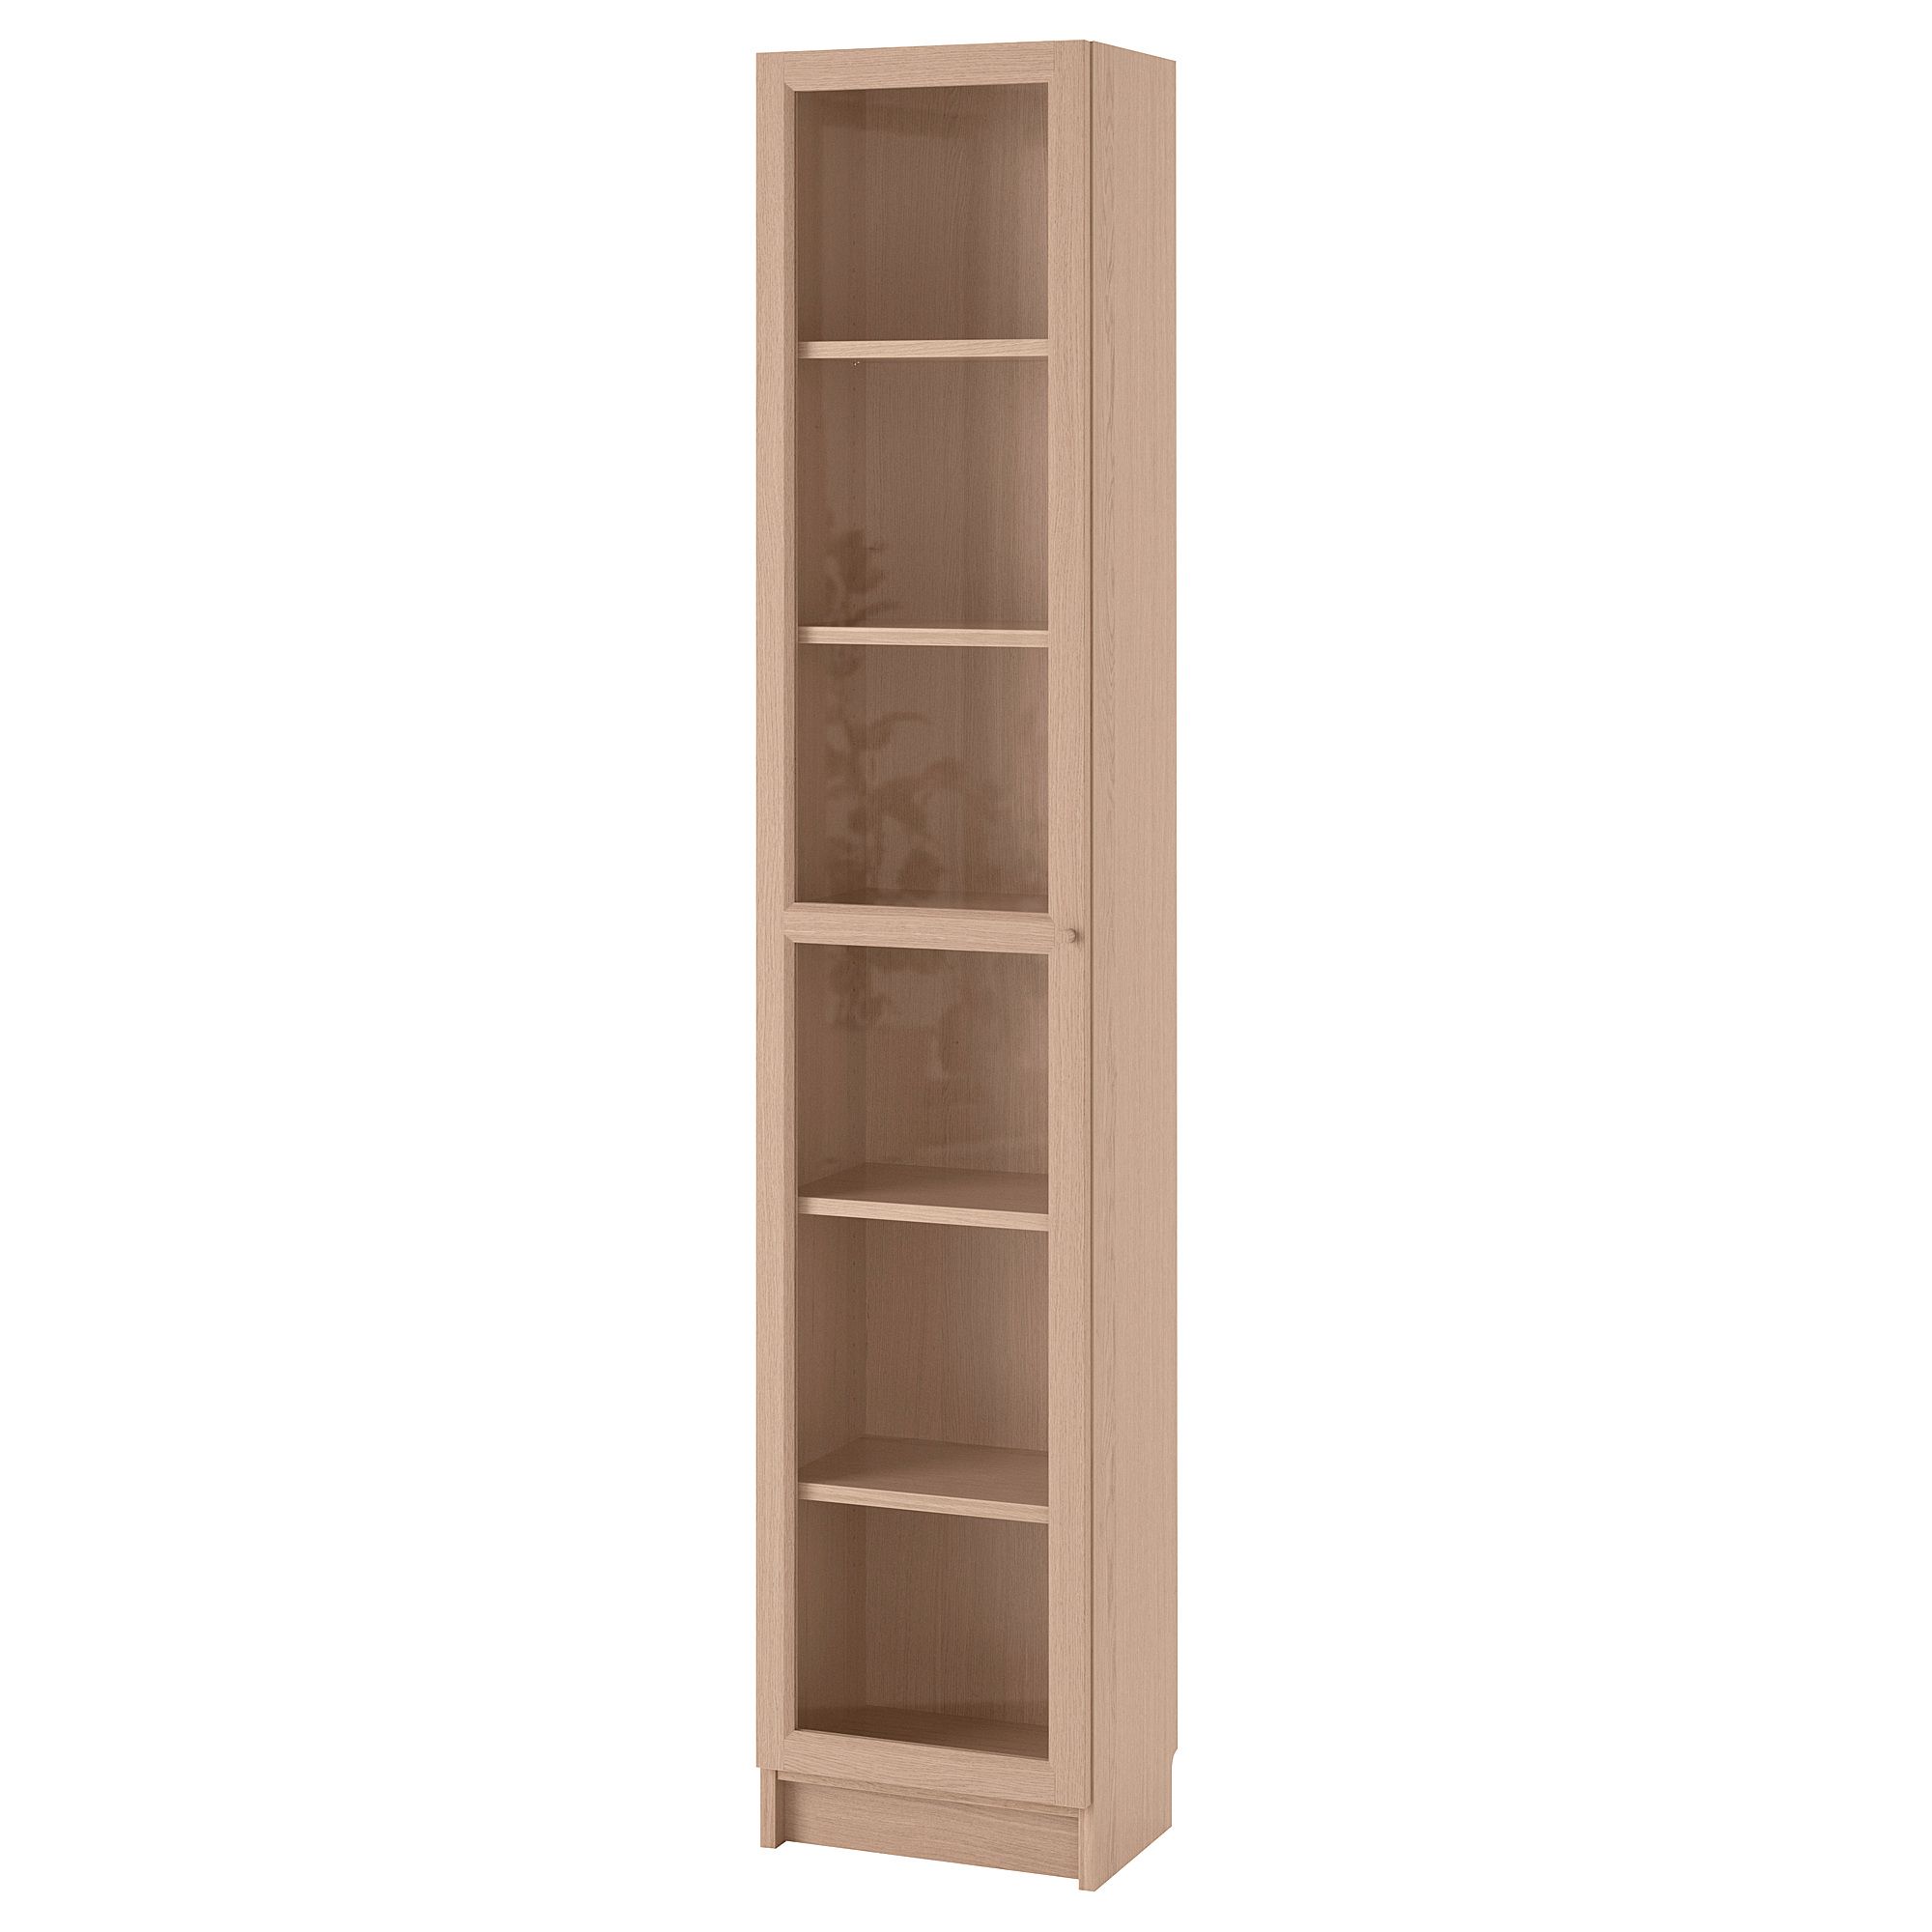 Billy/oxberg Bookcase With Glass Door White Stained Oak Veneer/glass  40x30x202 Cm | Ikea Lietuva Intended For Two Door Hutch Bookcases (View 11 of 15)